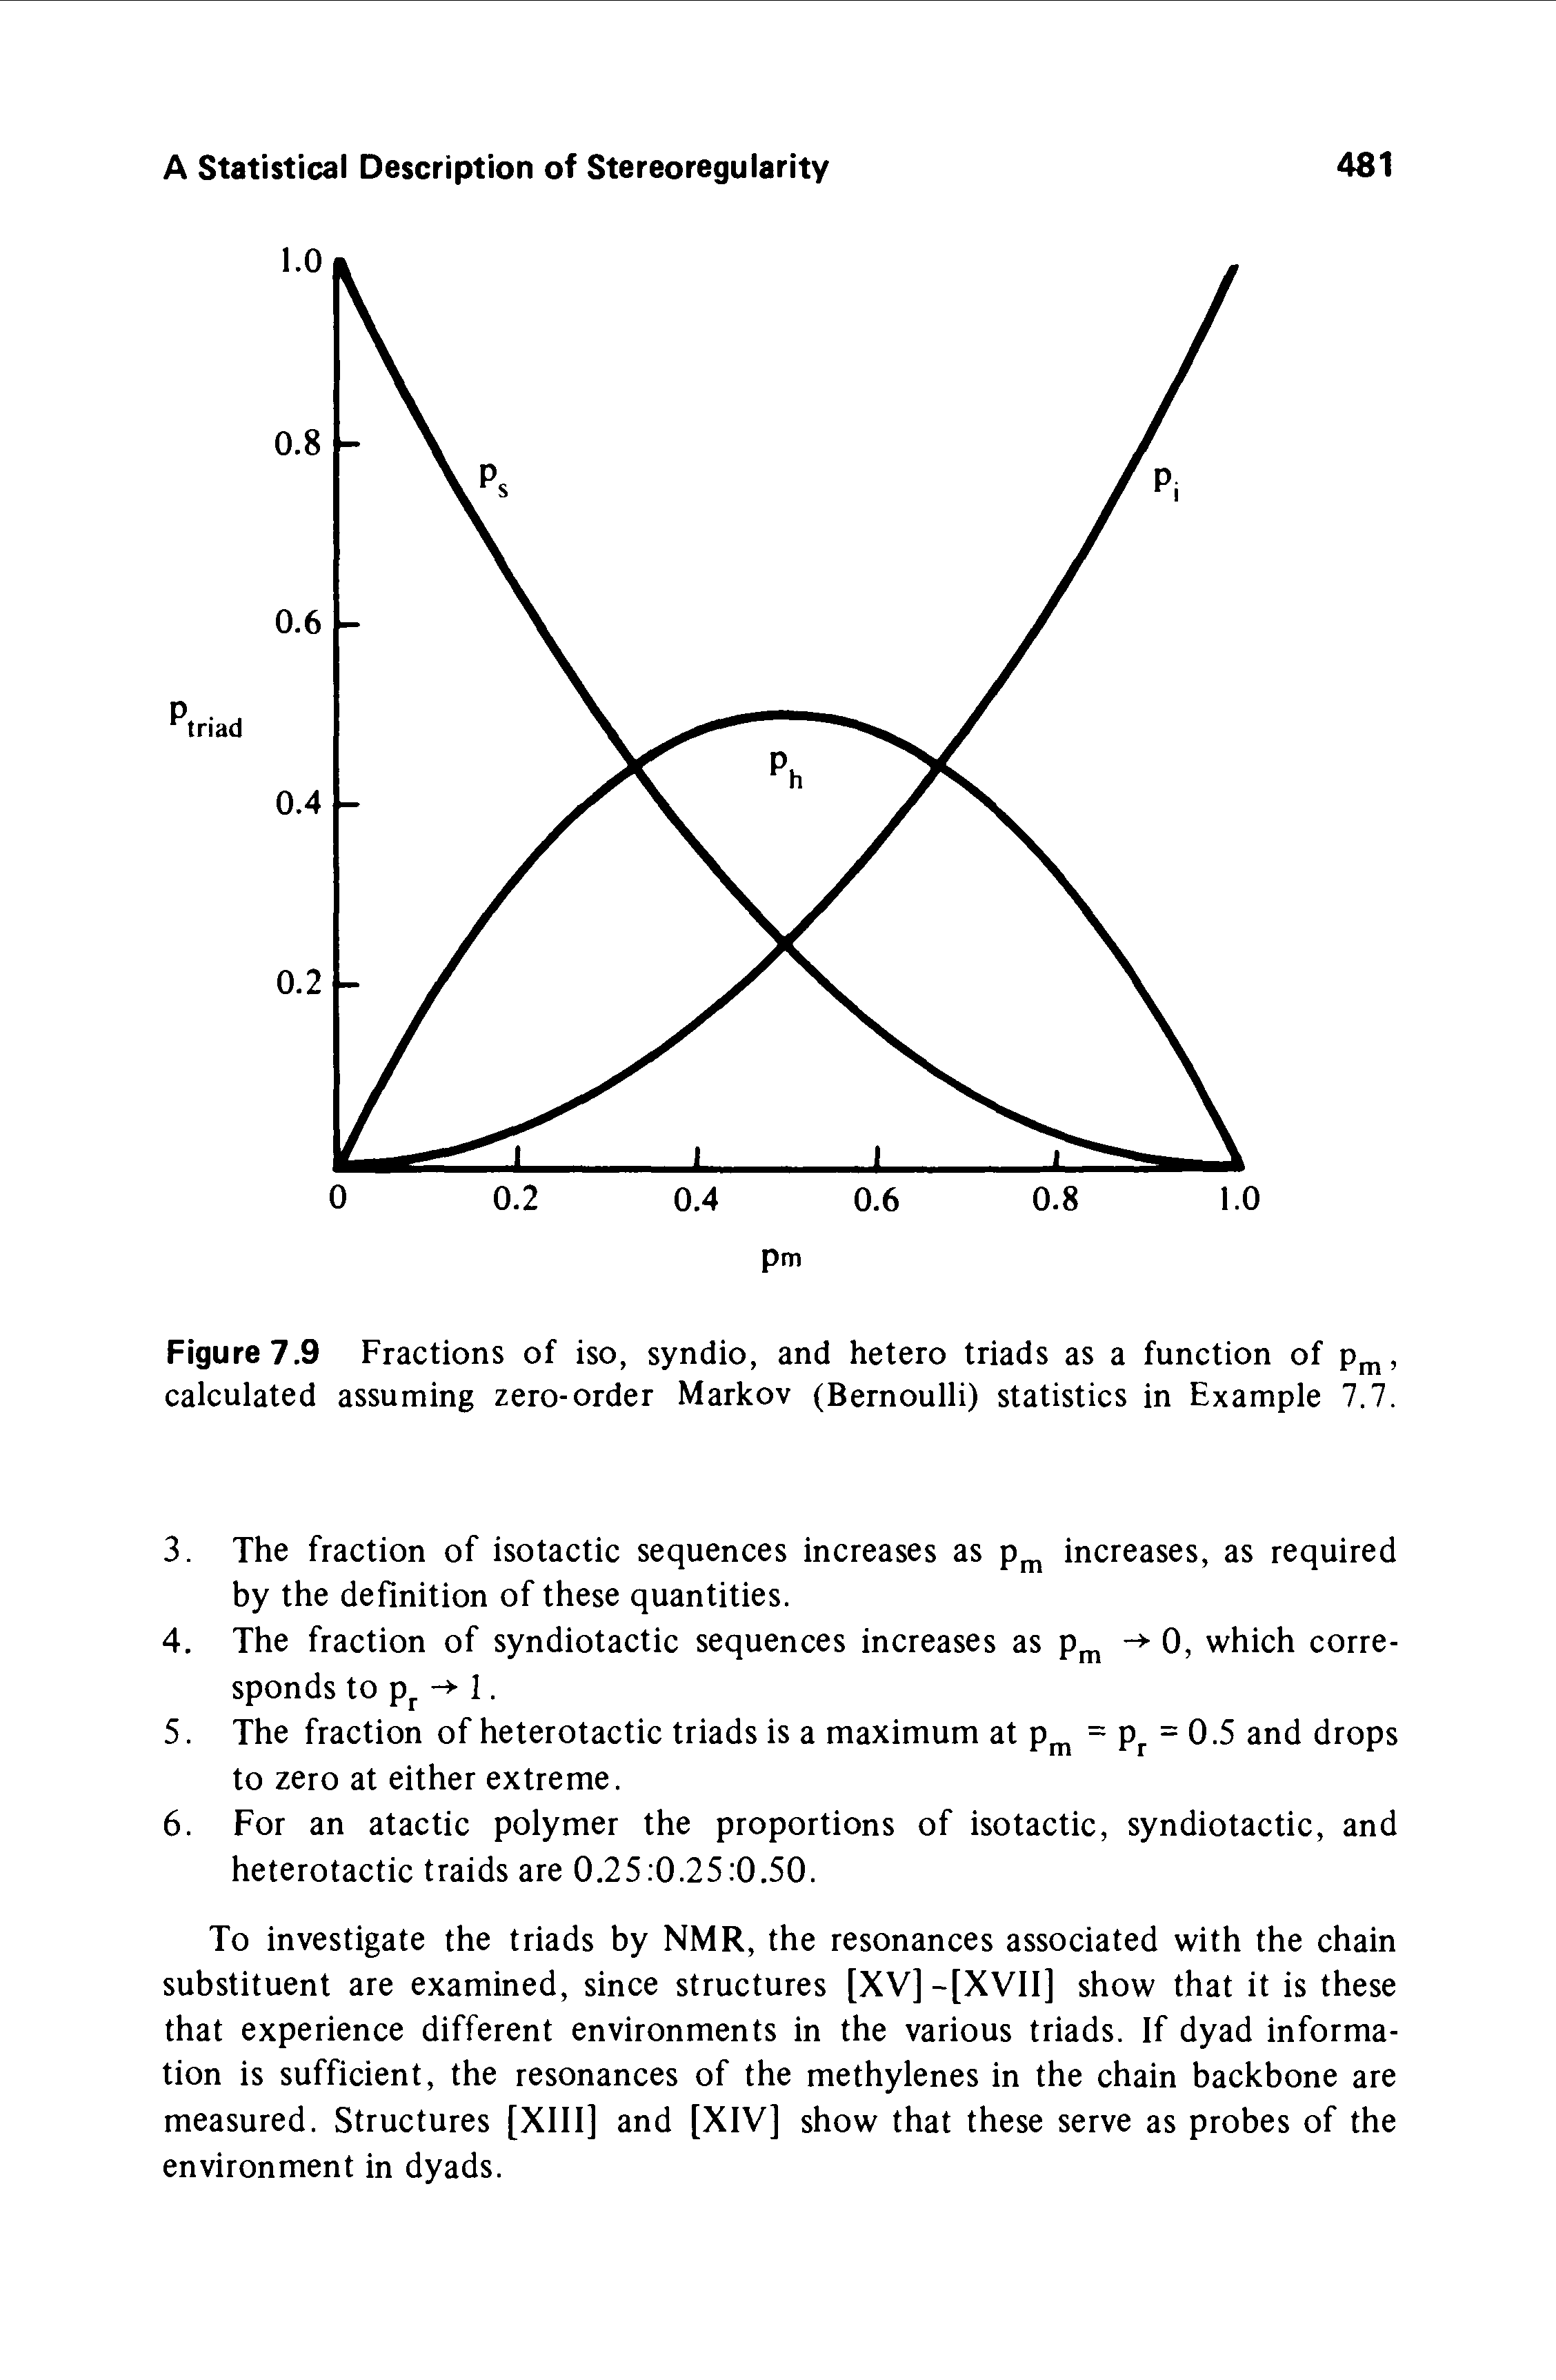 Figure 7.9 Fractions of iso, syndio, and hetero triads as a function of p, calculated assuming zero-order Markov (Bernoulli) statistics in Example 7.7.